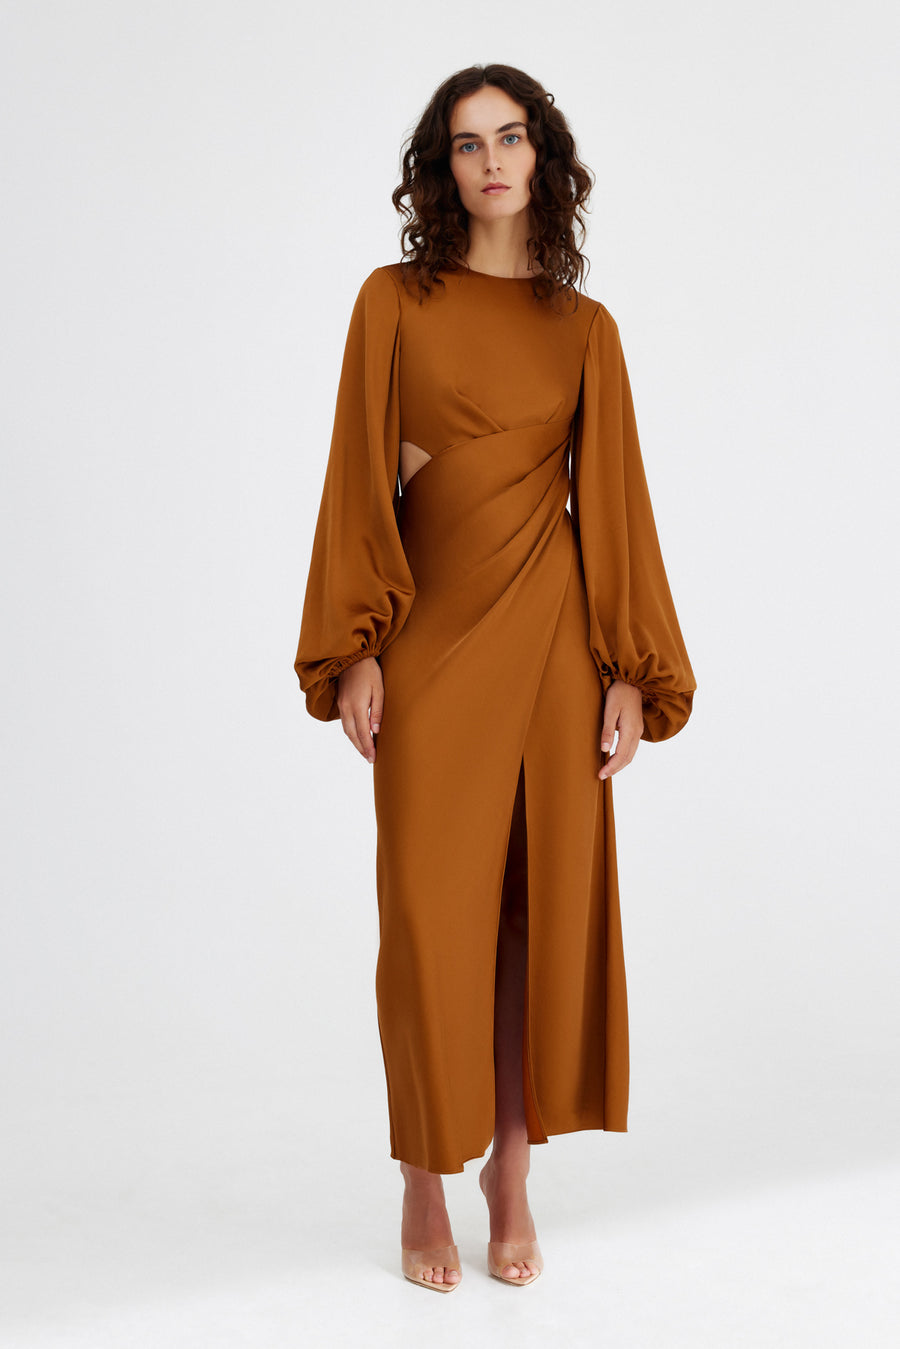 Signficant Other Lara Long Sleeve Dress